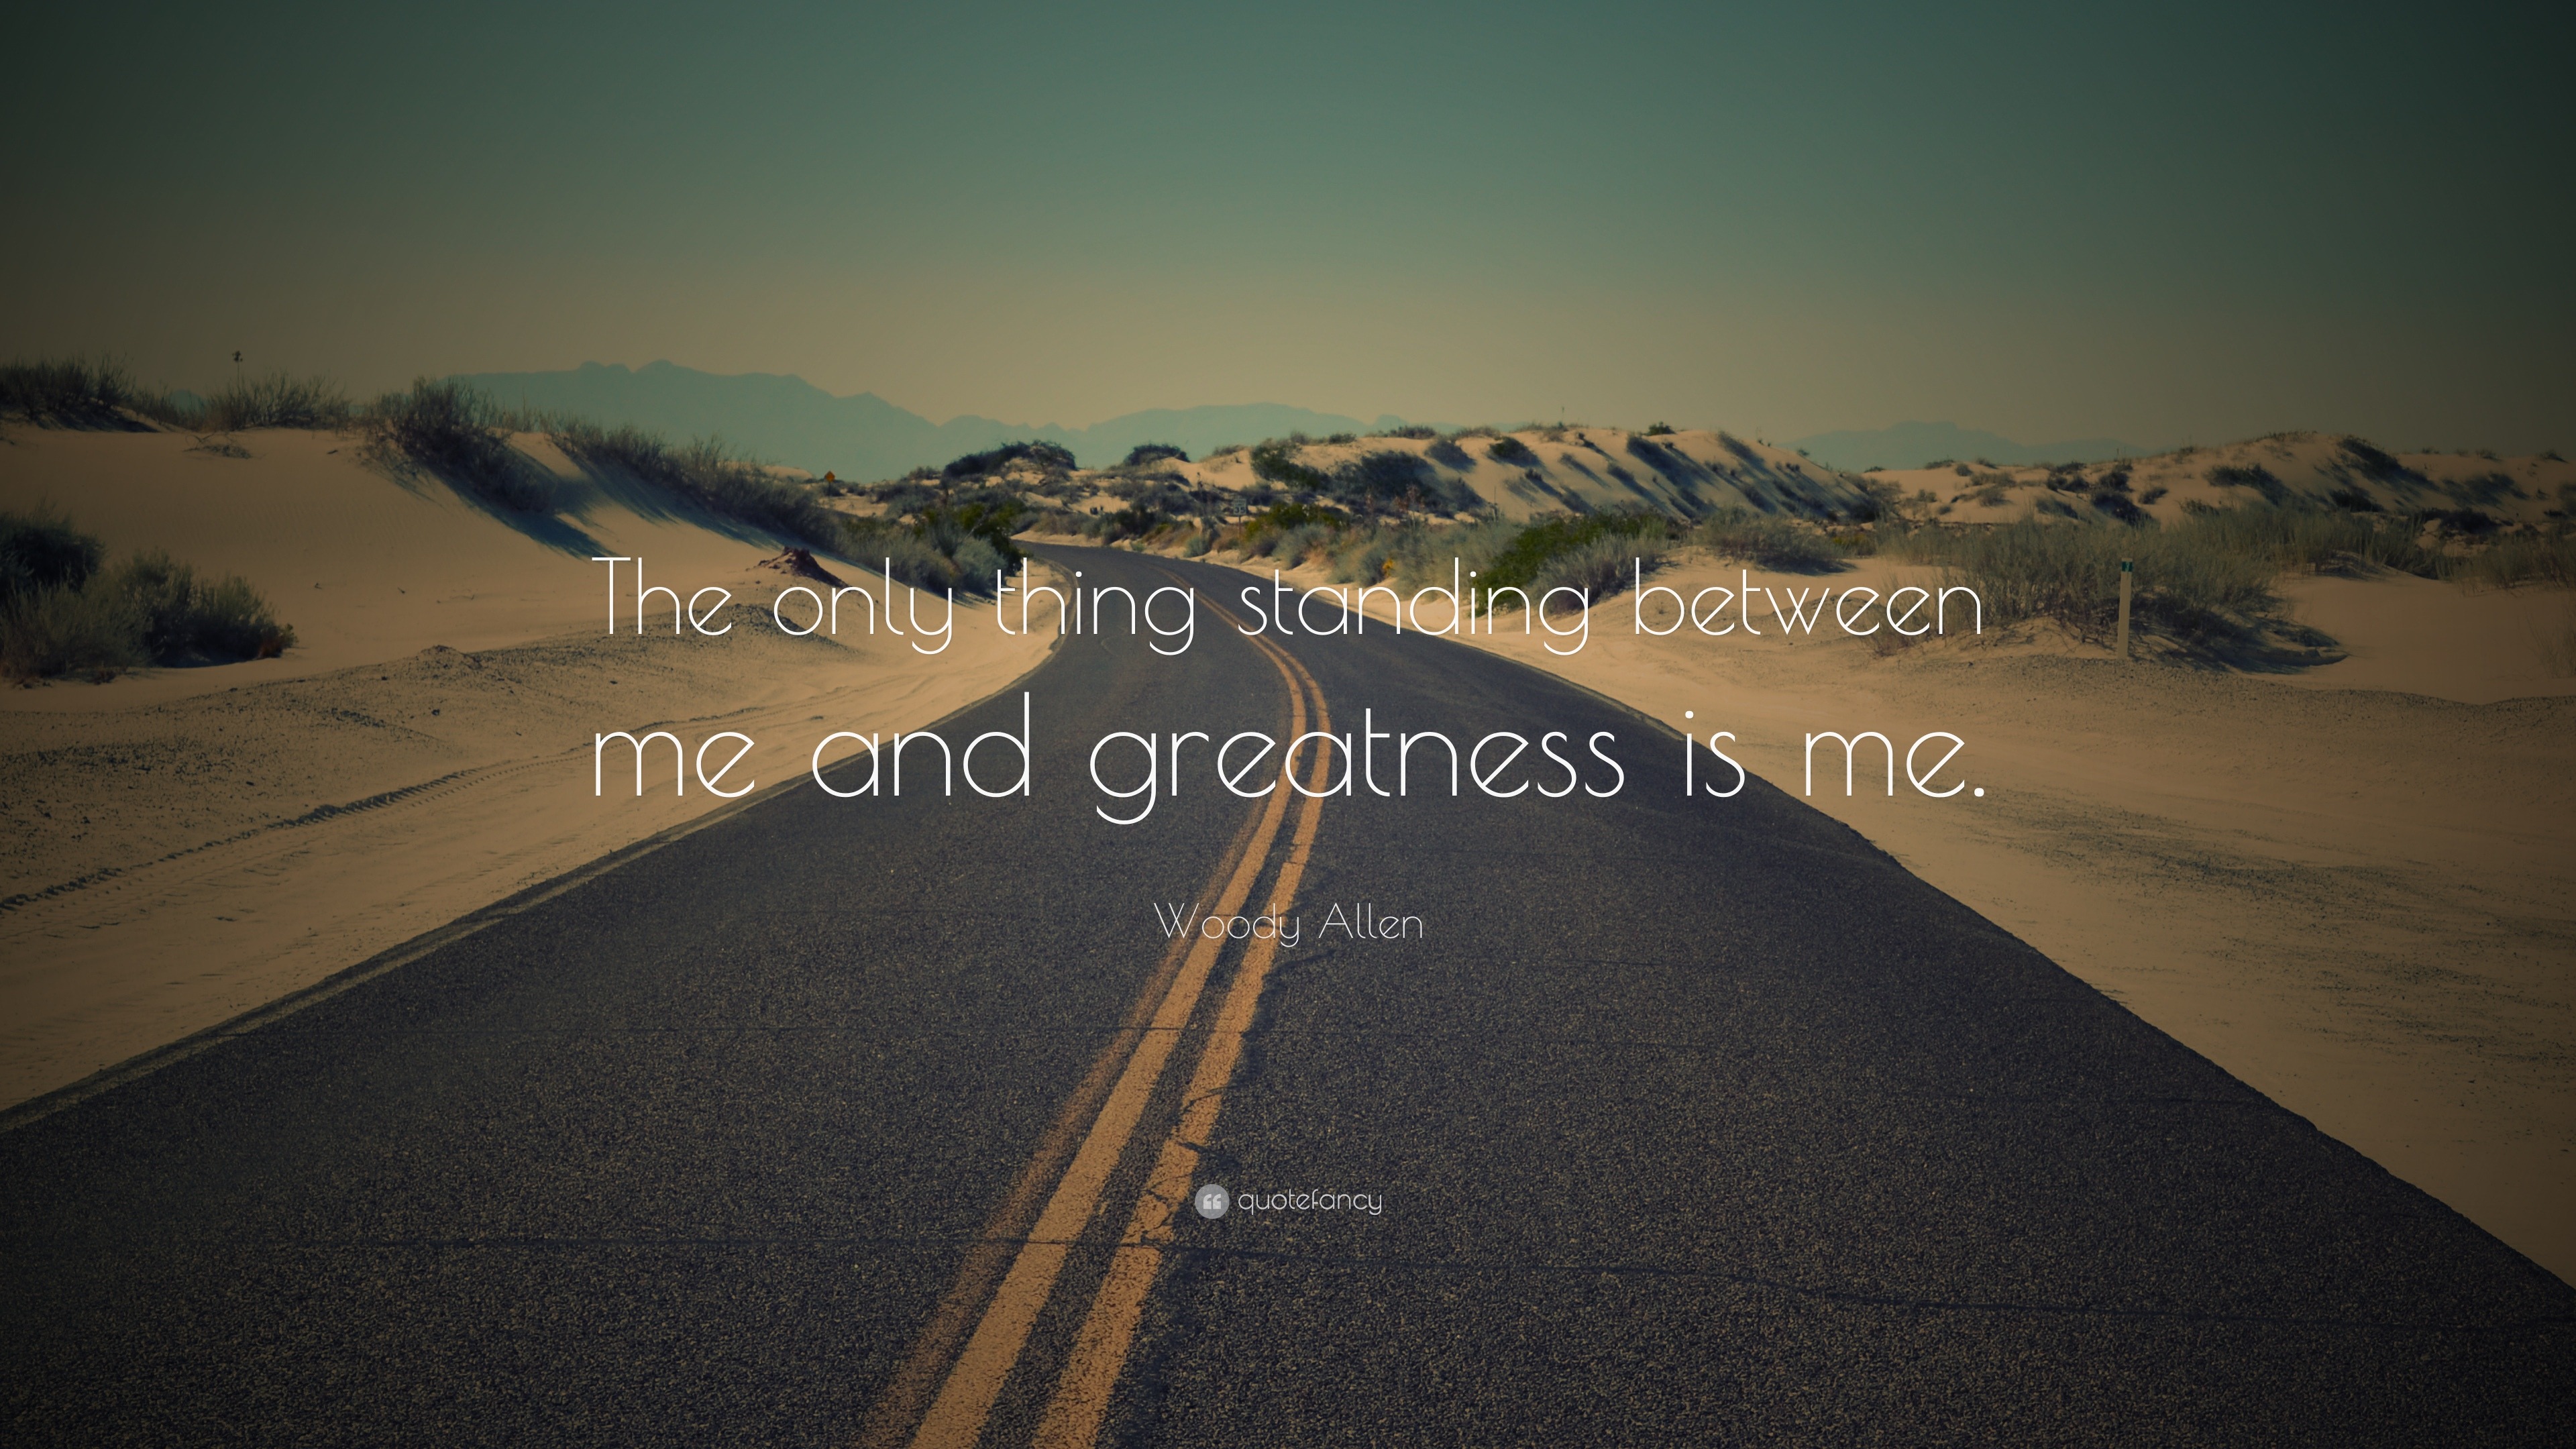 Woody Allen Quote: “The only thing standing between me and greatness is ...